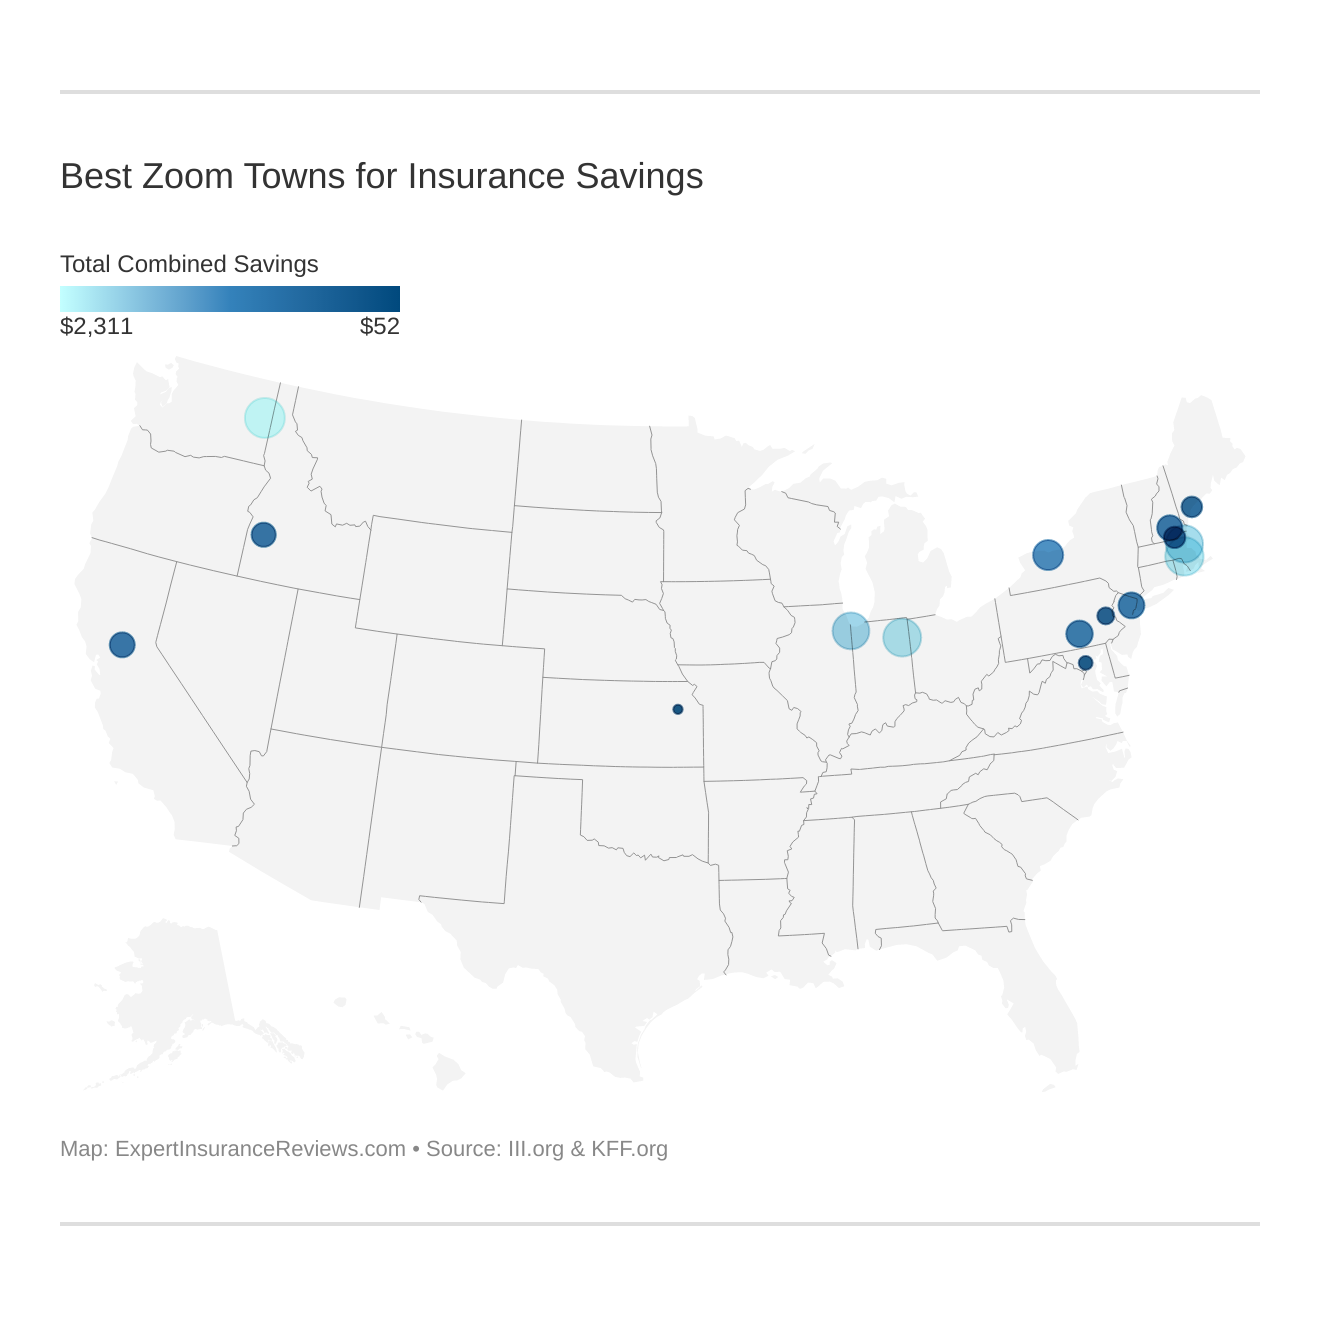 Best Zoom Towns for Insurance Savings